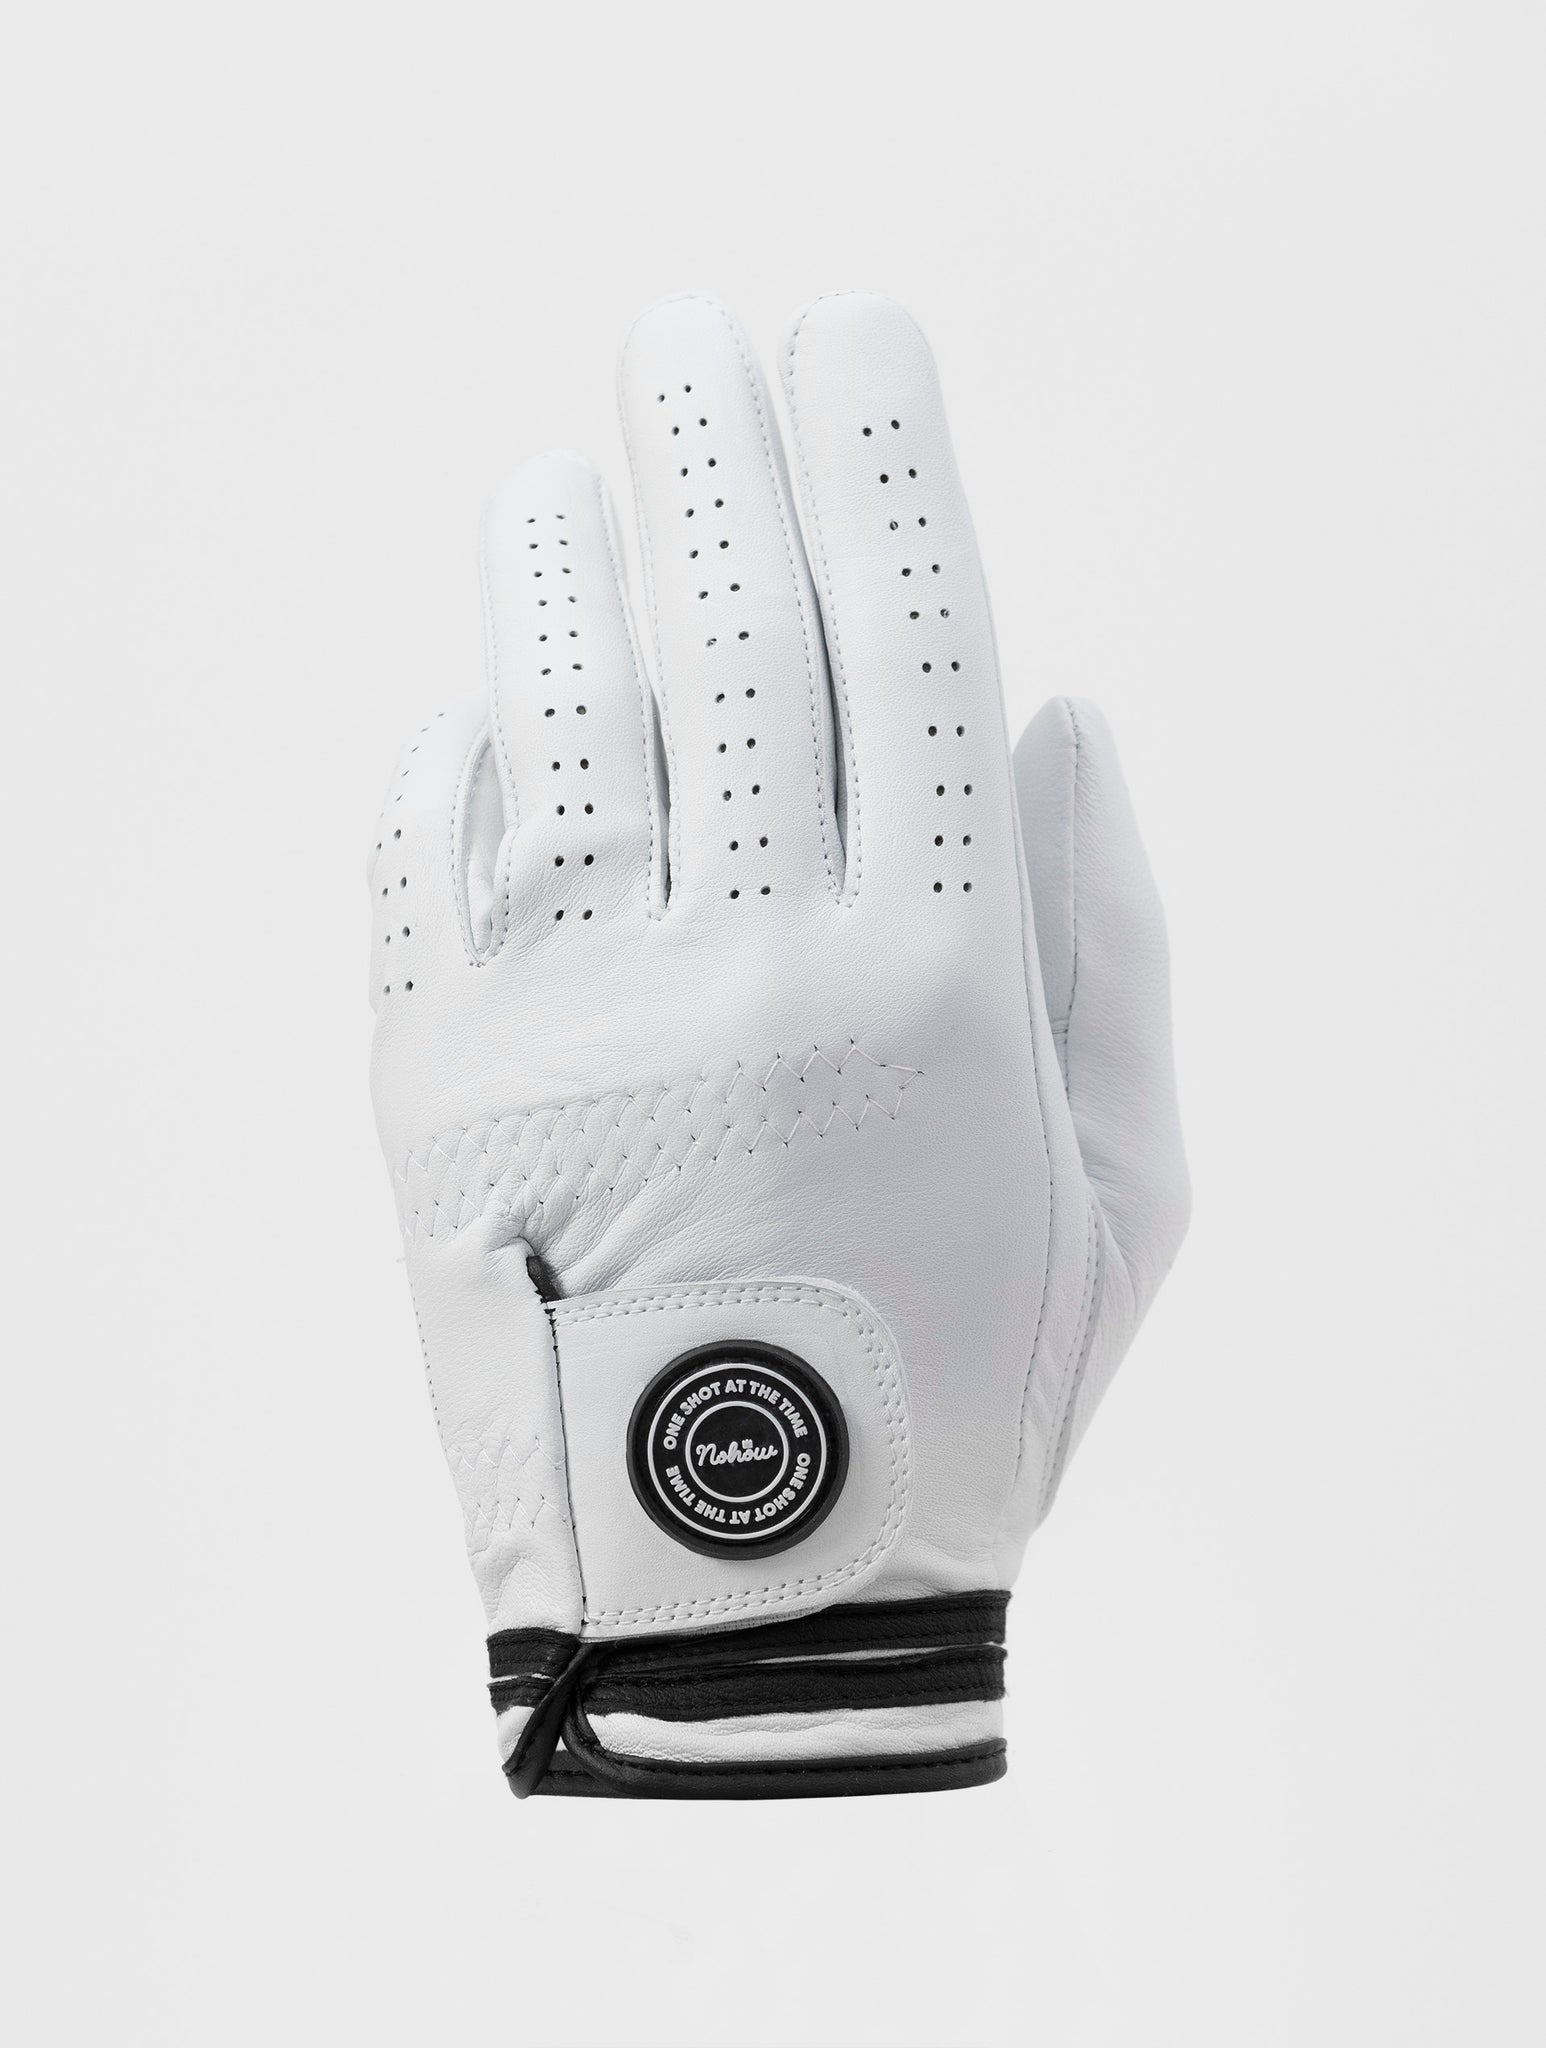 NOHOW GOLF LEFT GLOVE IN WHITE AND BLACK